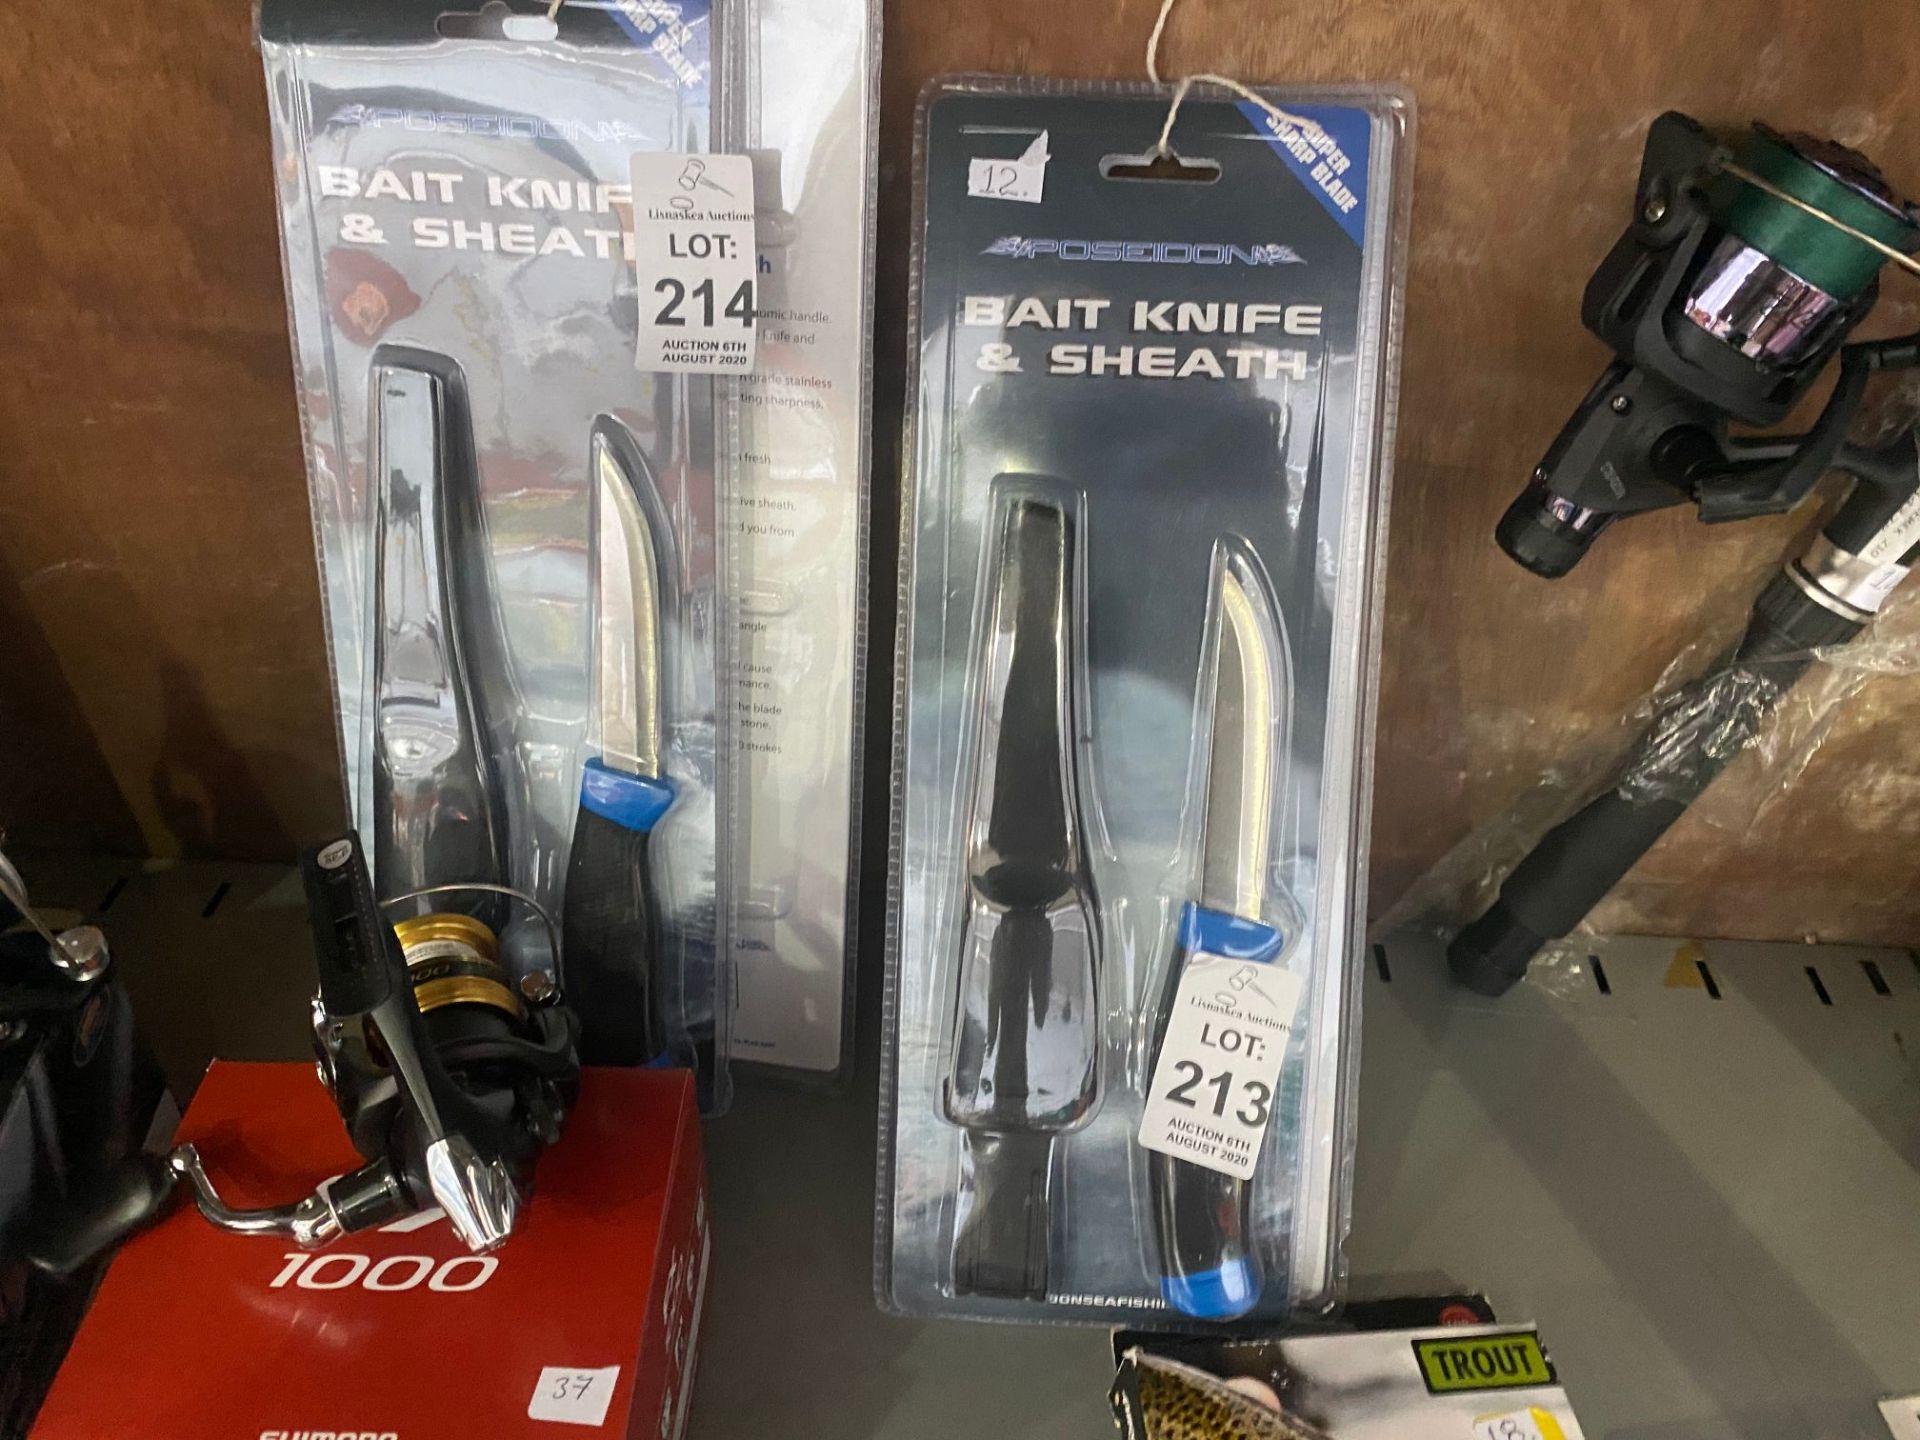 PAIR OF NEW POSEIDON BAIT KNIVES AND SHEATHES (OVER 18YRS ONLY ID MAY BE REQUIRED ON COLLECTION)